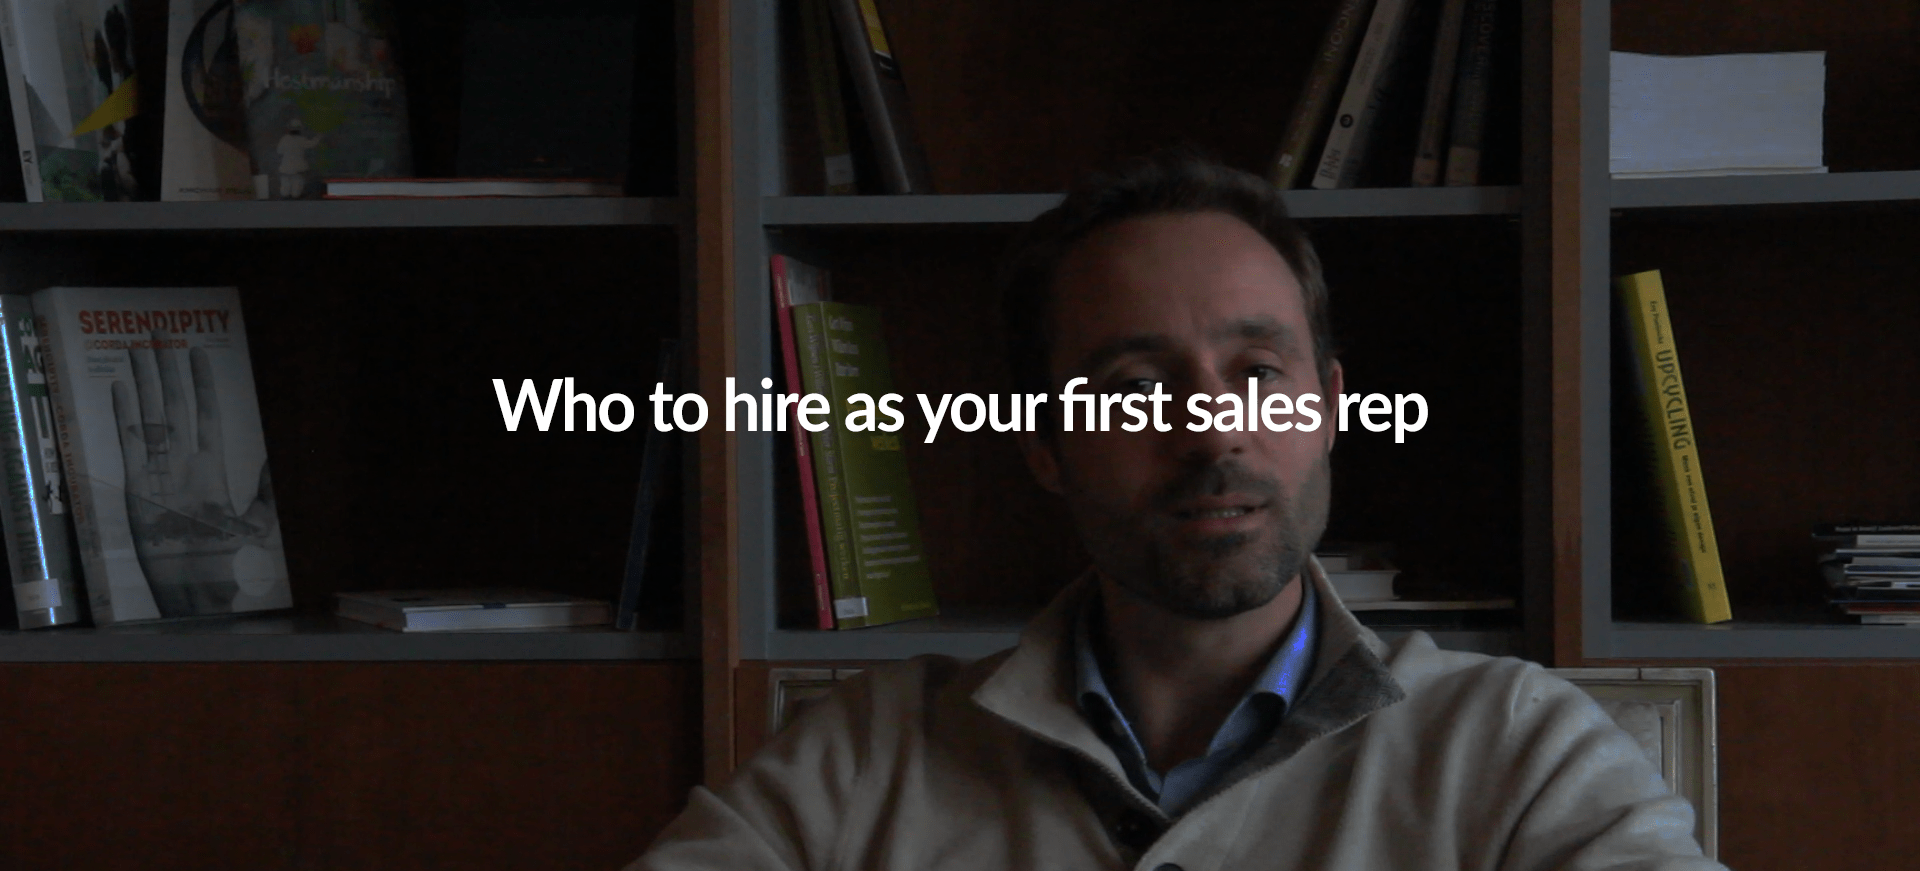 who to hire as your first sales rep